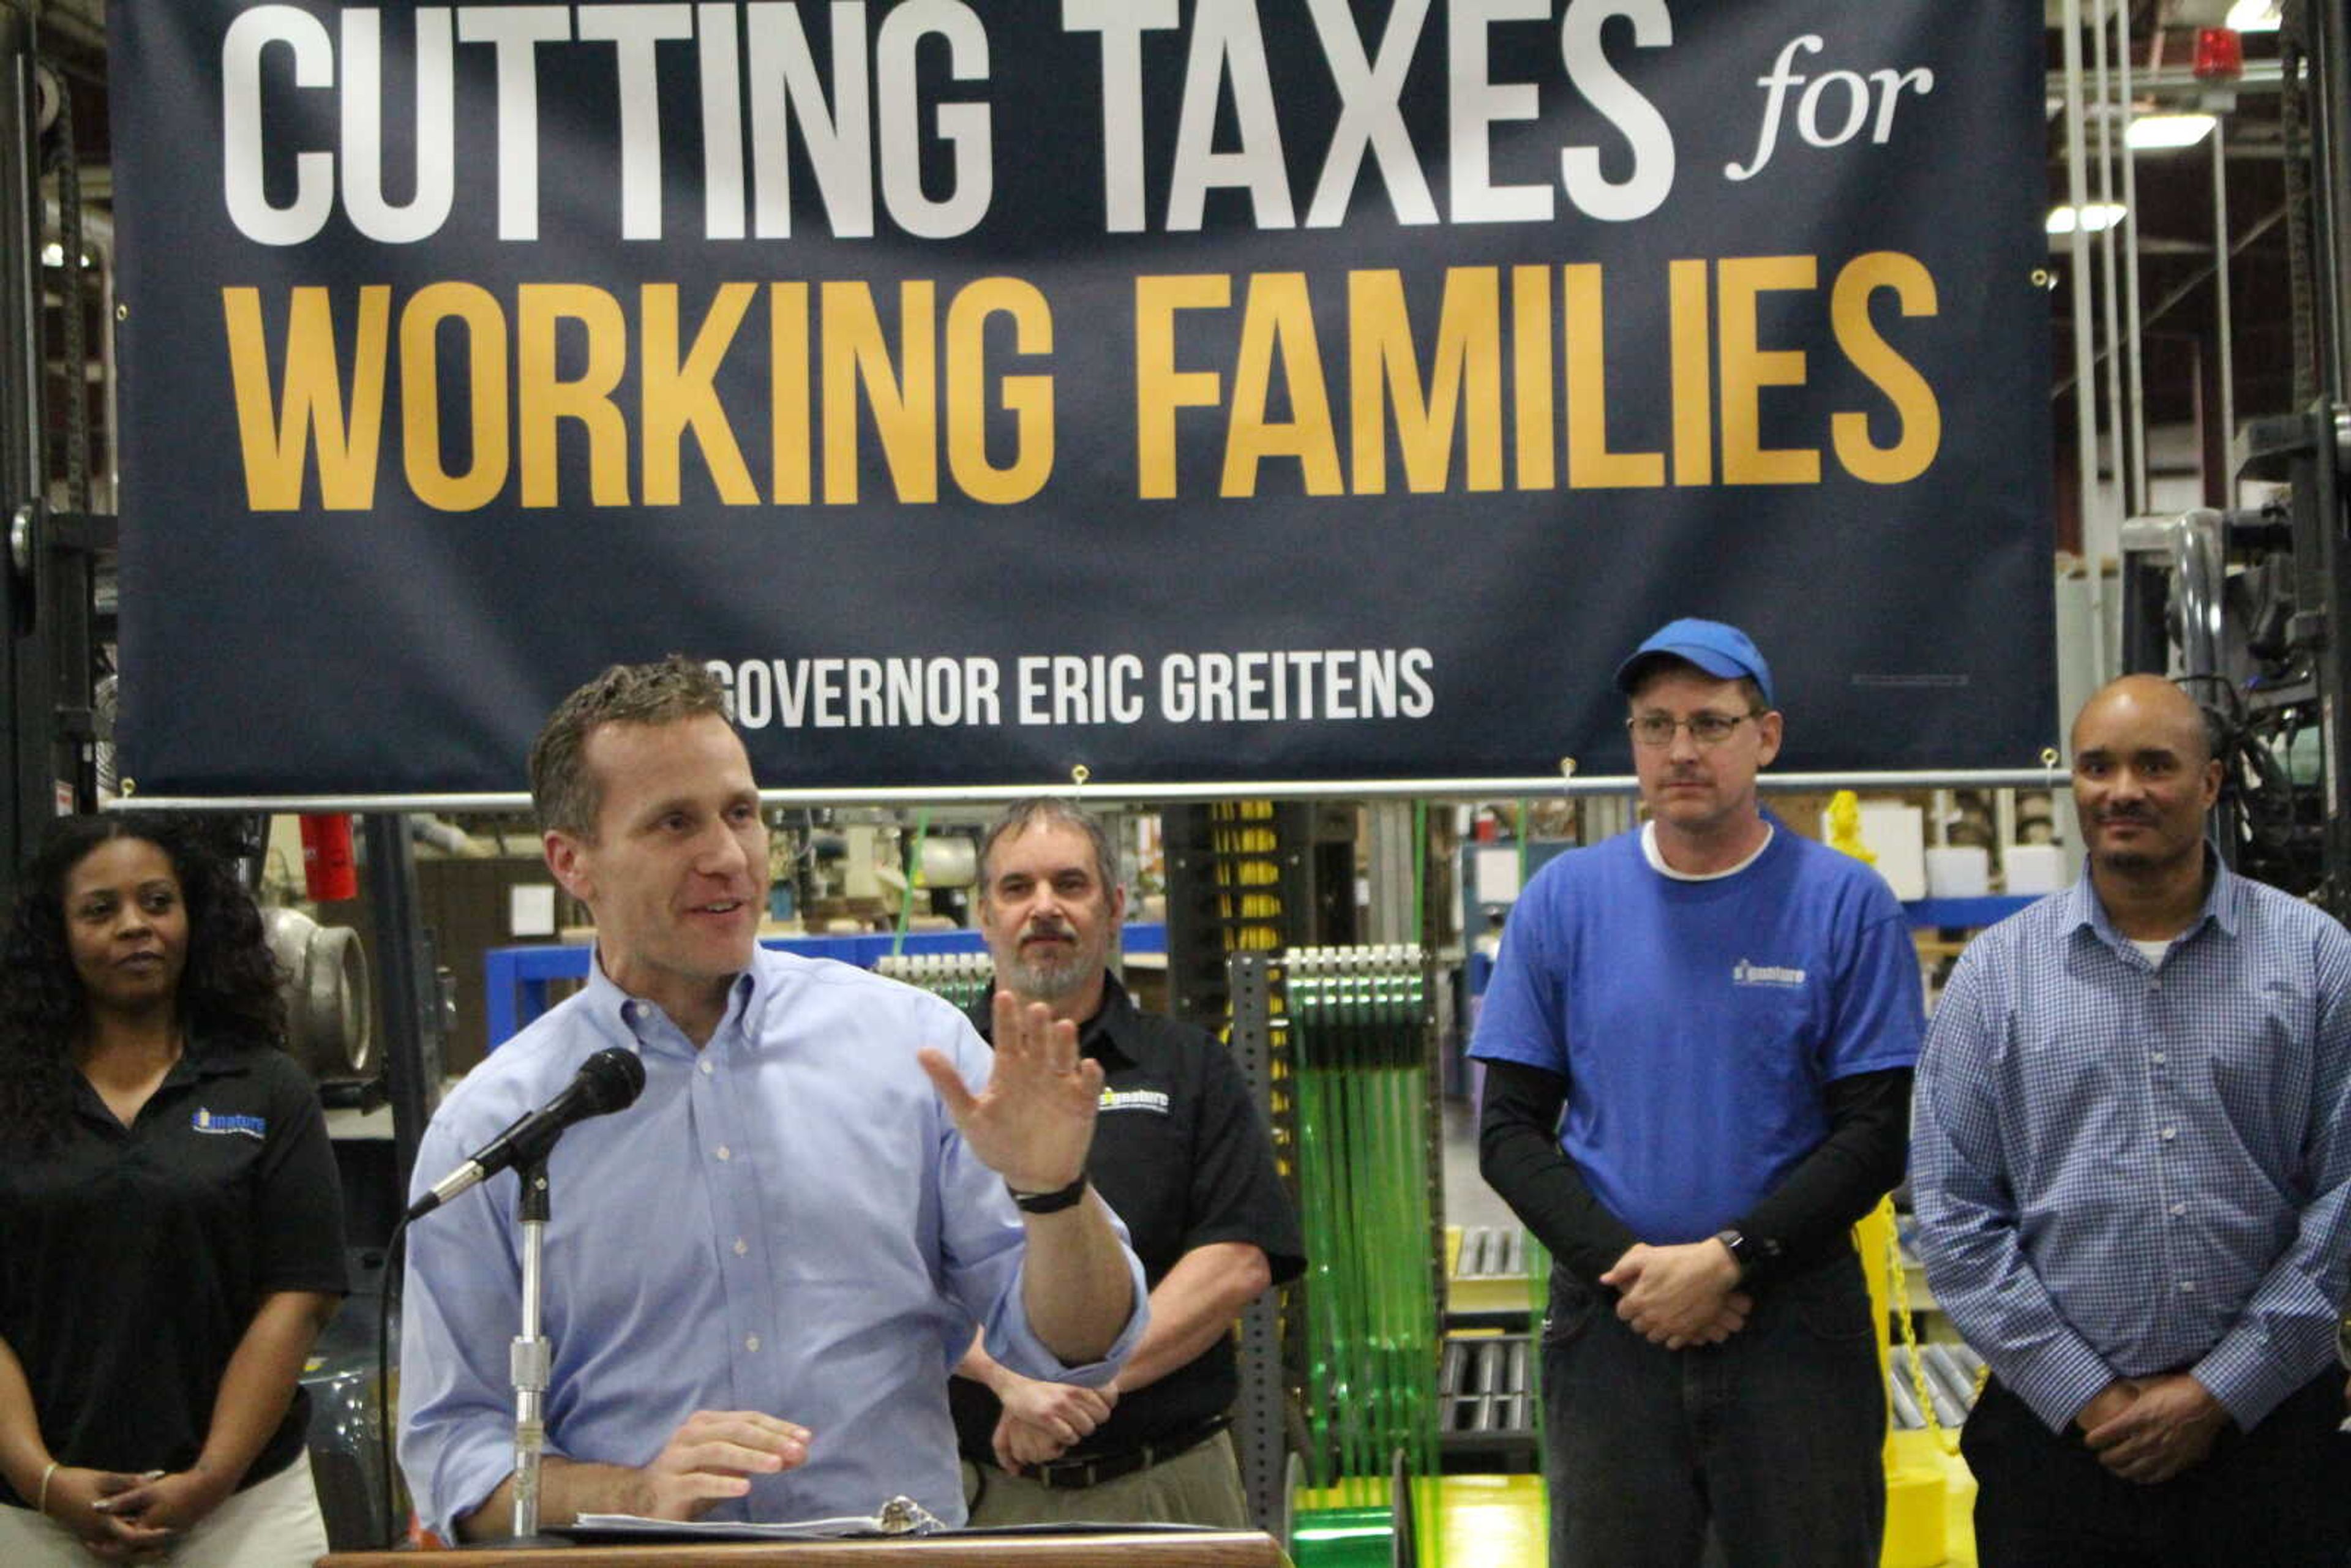 Gov. Eric Greitens makes a public appearance in Jackson to discuss his new tax plan which he said would cut taxes for 97% of Missourians and lower government regulations. His appearance took place at Signature Packing & Paper on Jan. 29 and was just one of many stops on his tour across the state.